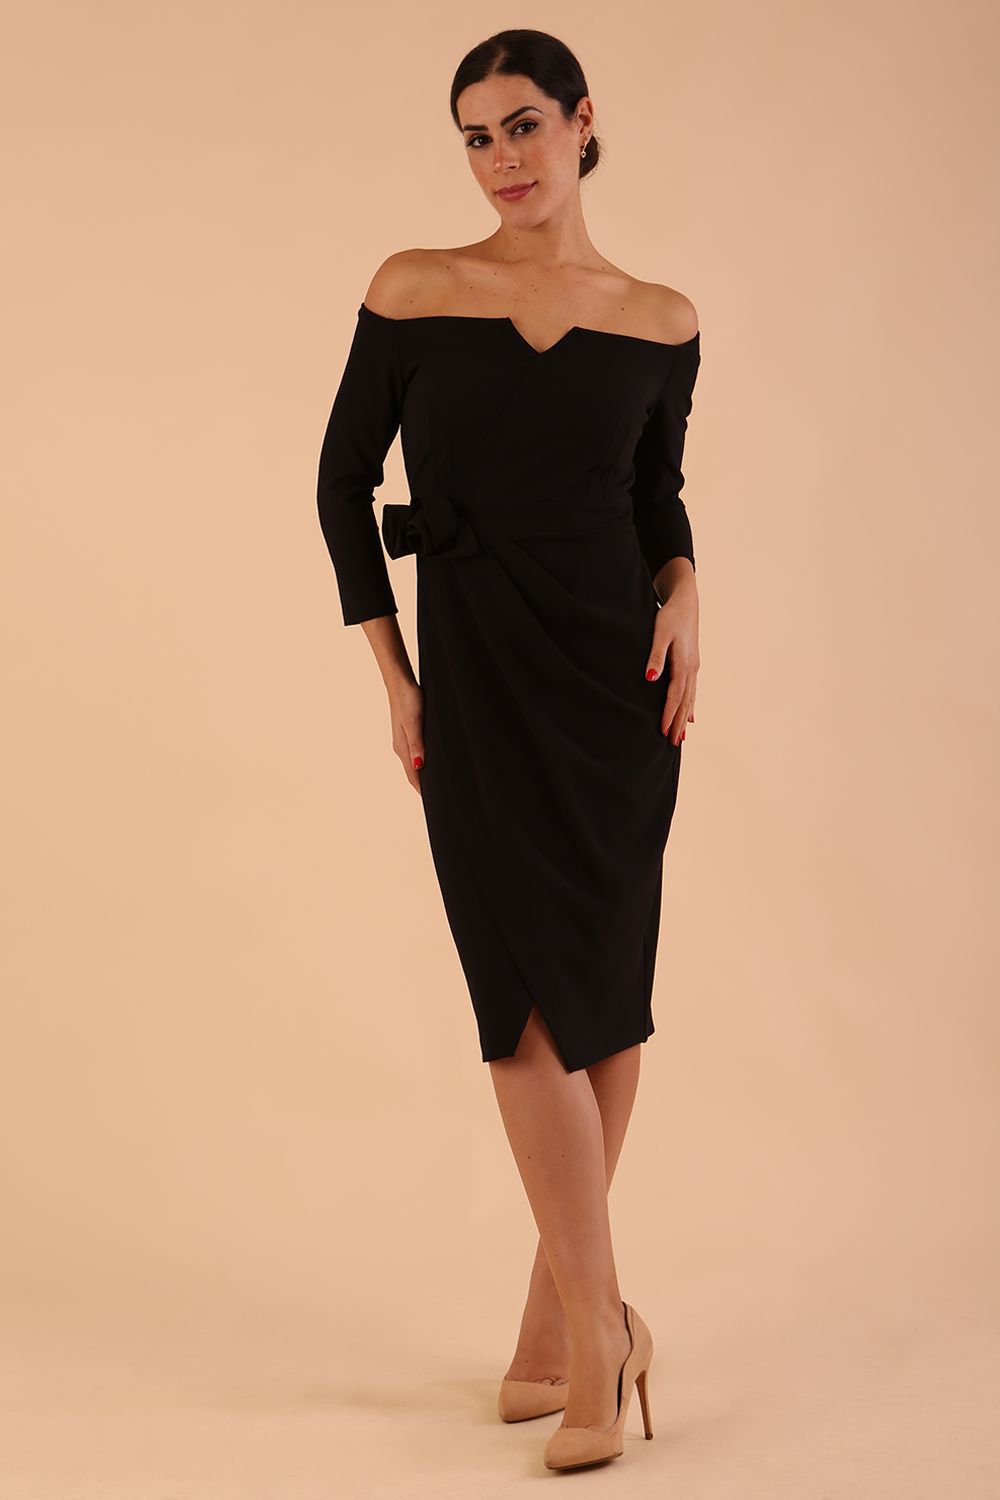 model is wearing diva catwalk charisma dress odd shoulder design with pleated detail down the front and flower detail on a side in black colour